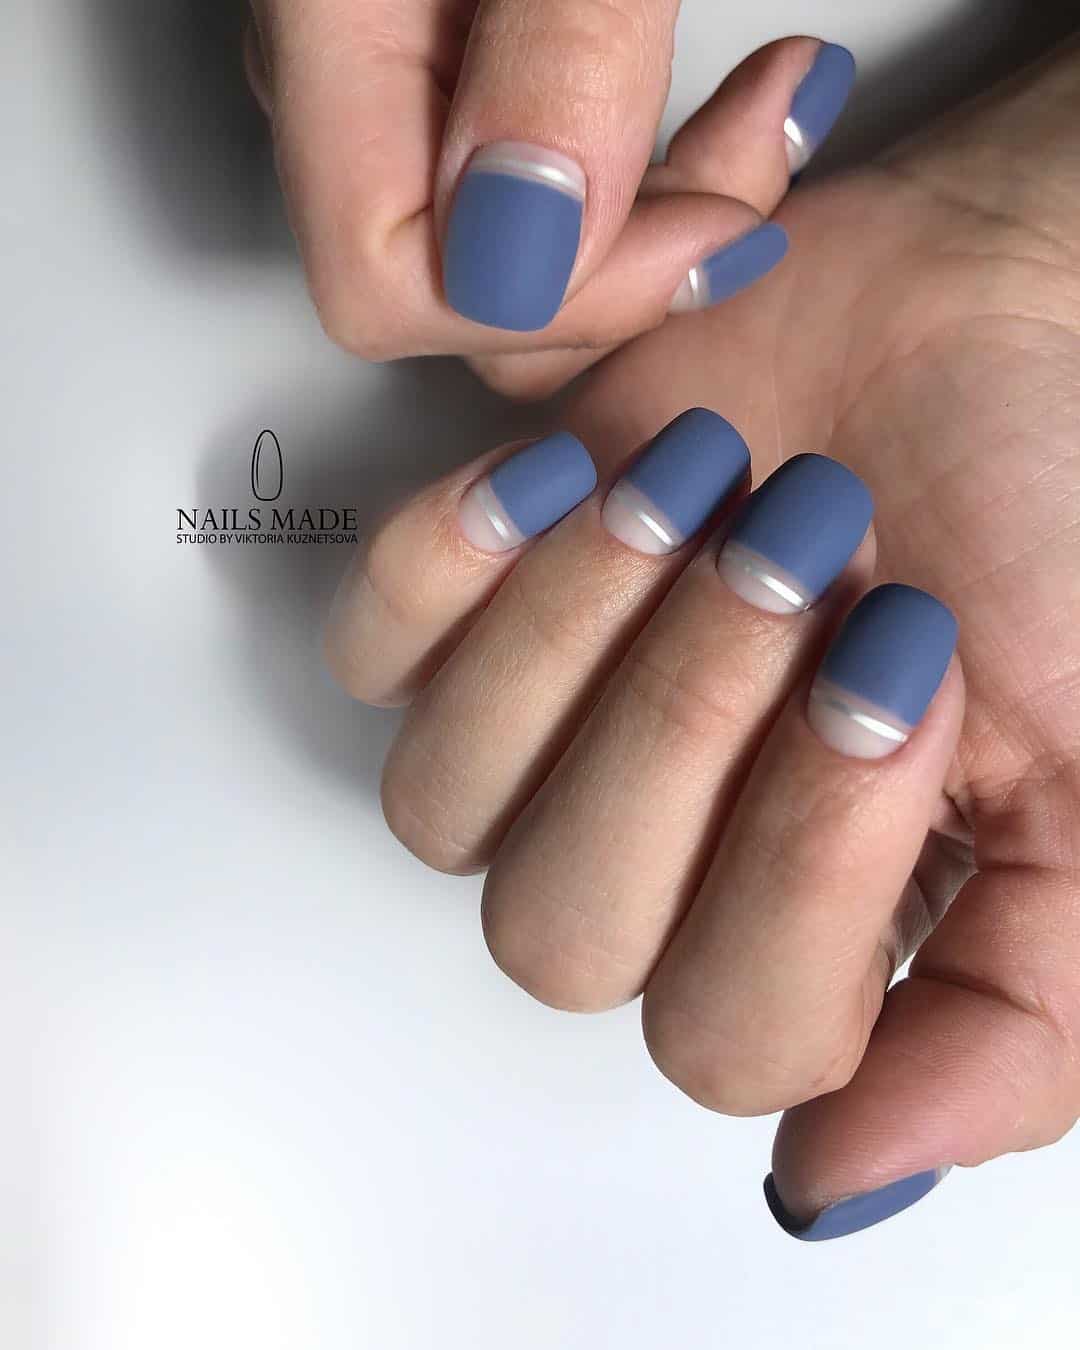 Matte nails are the perfect solution if you're sick of glossy, shiny, wet looking nails. Matte polish stays on longer than other types of nail polish and it's much easier to clean off. The best part is that matte nail polish comes in so many different colors! #mattenails #mattenailart #mattenaildesigns #matteacrylicnails